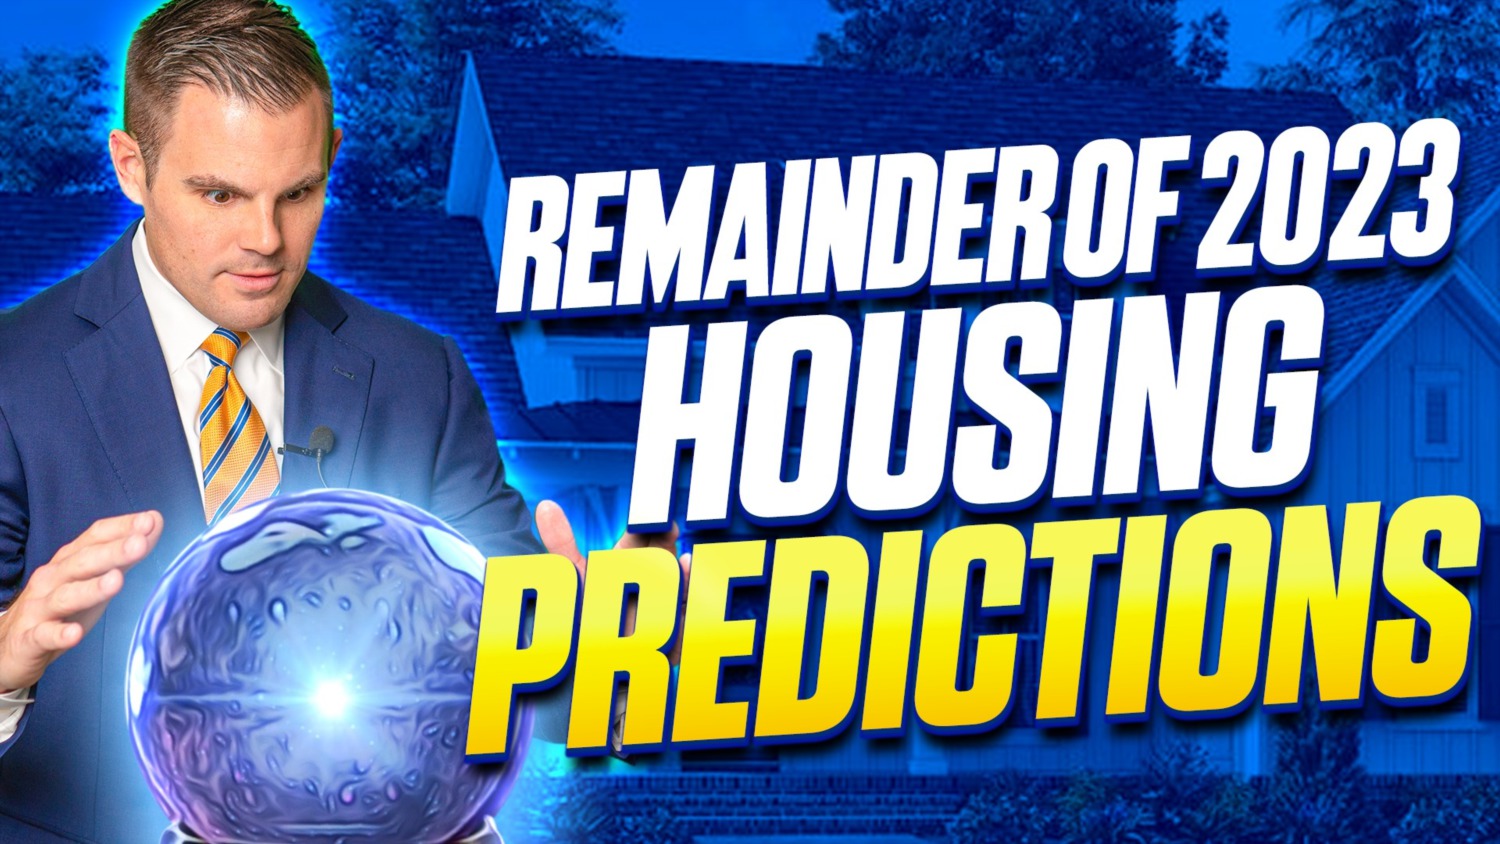 17261 Remainder Of 2023 Housing Predictions 